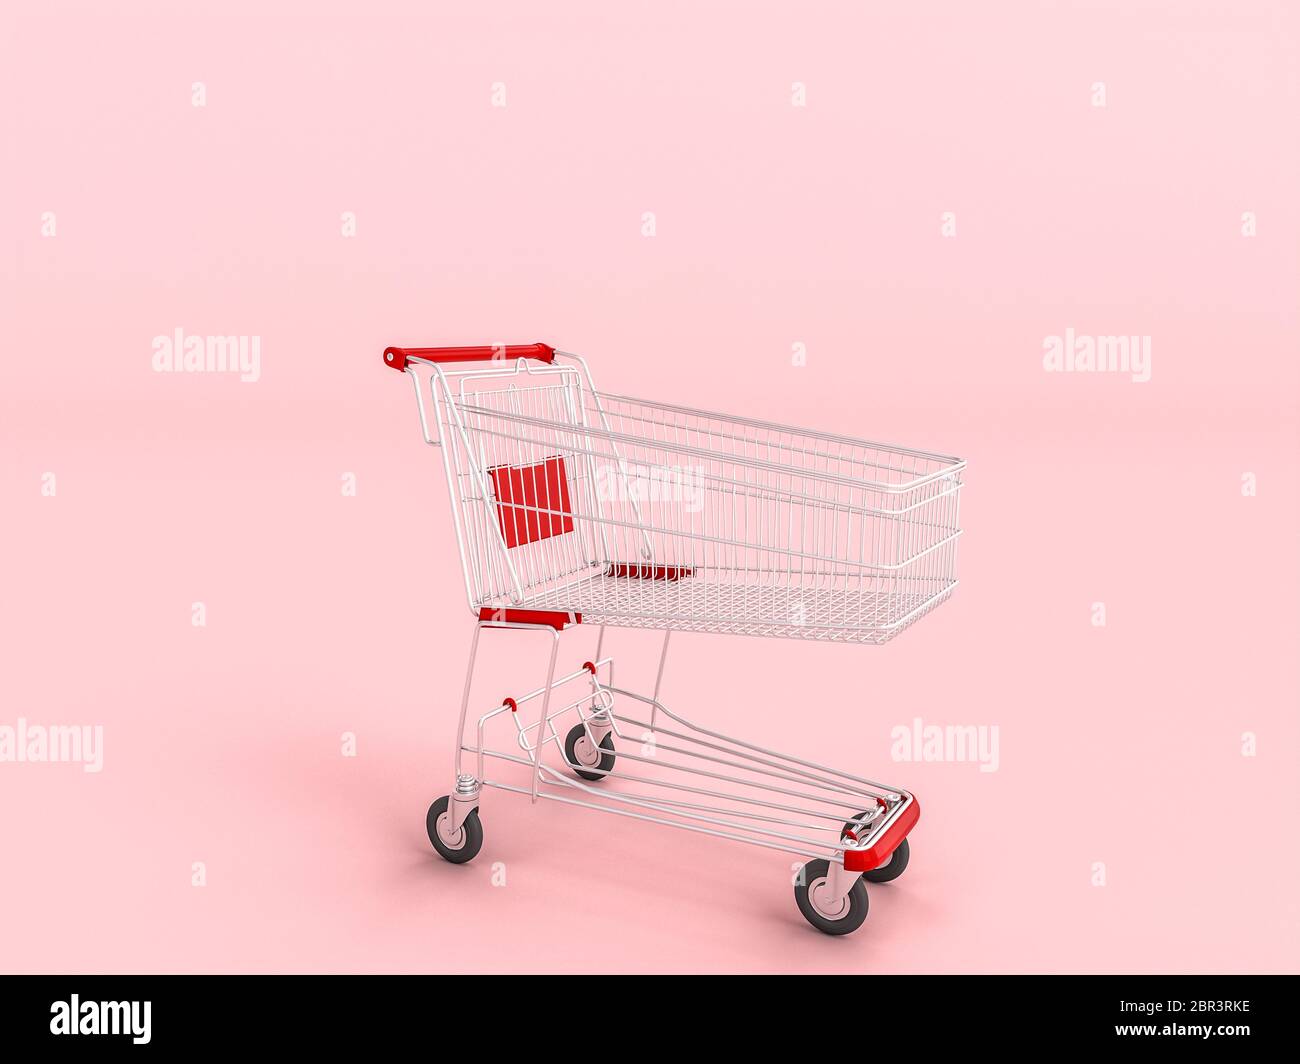 empty shopping cart on pink background. nobody around. 3d render. concept of buying and selling products. Stock Photo